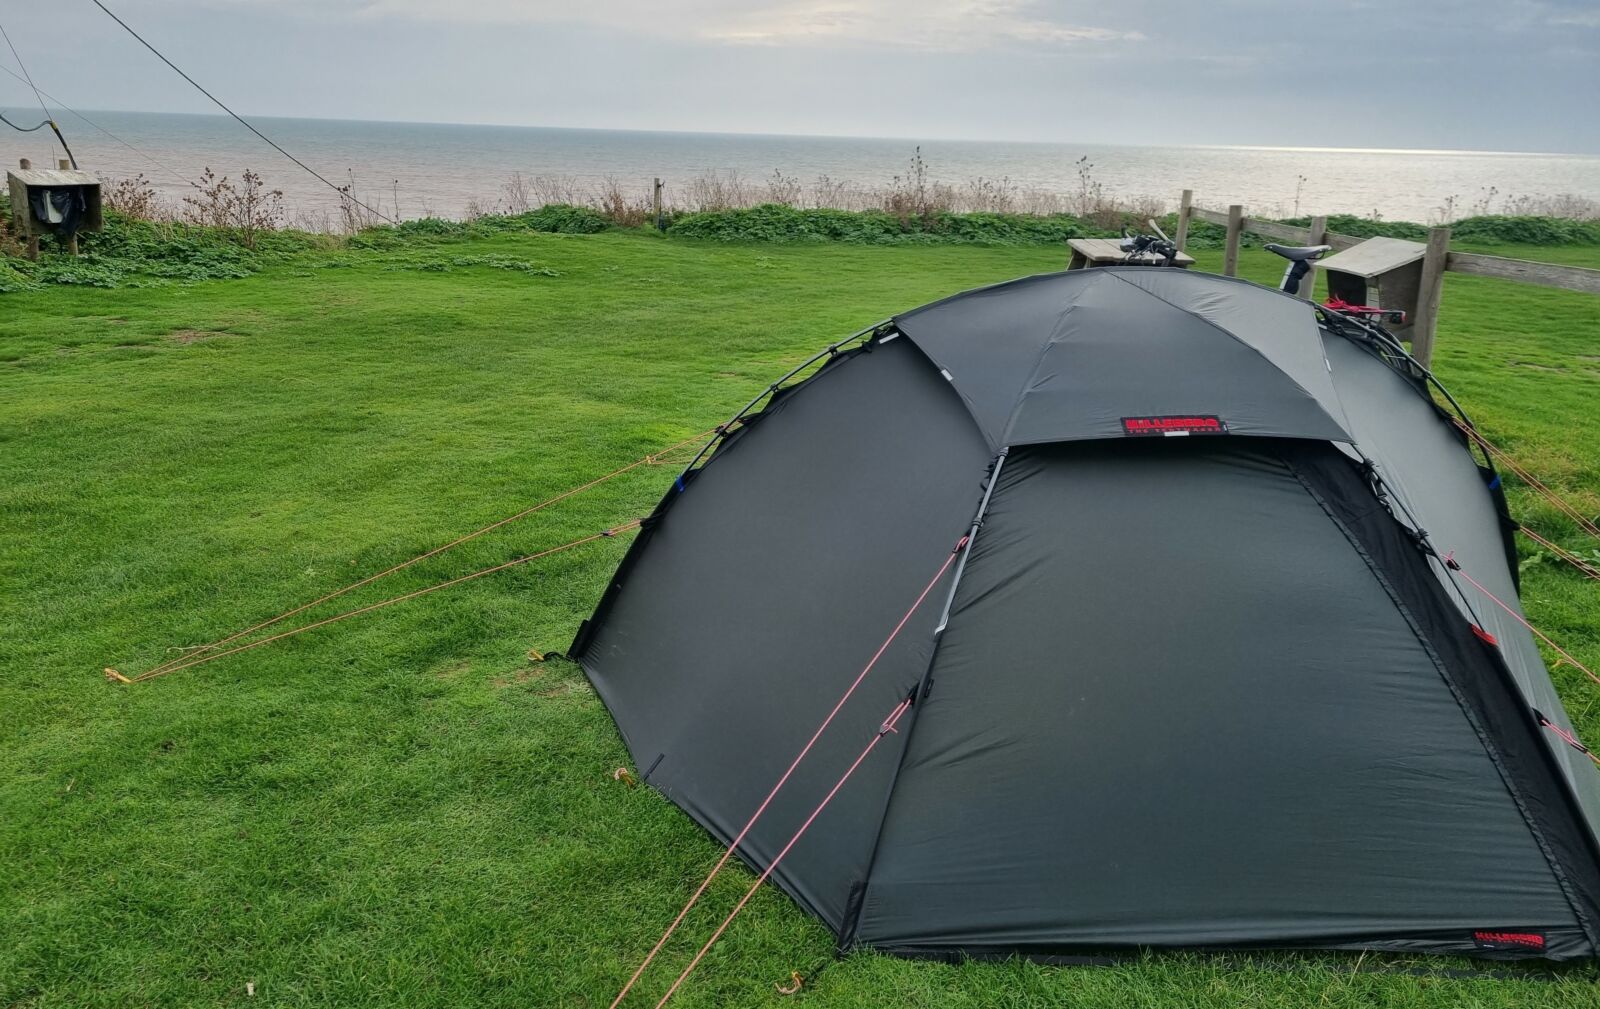 Tent by sea